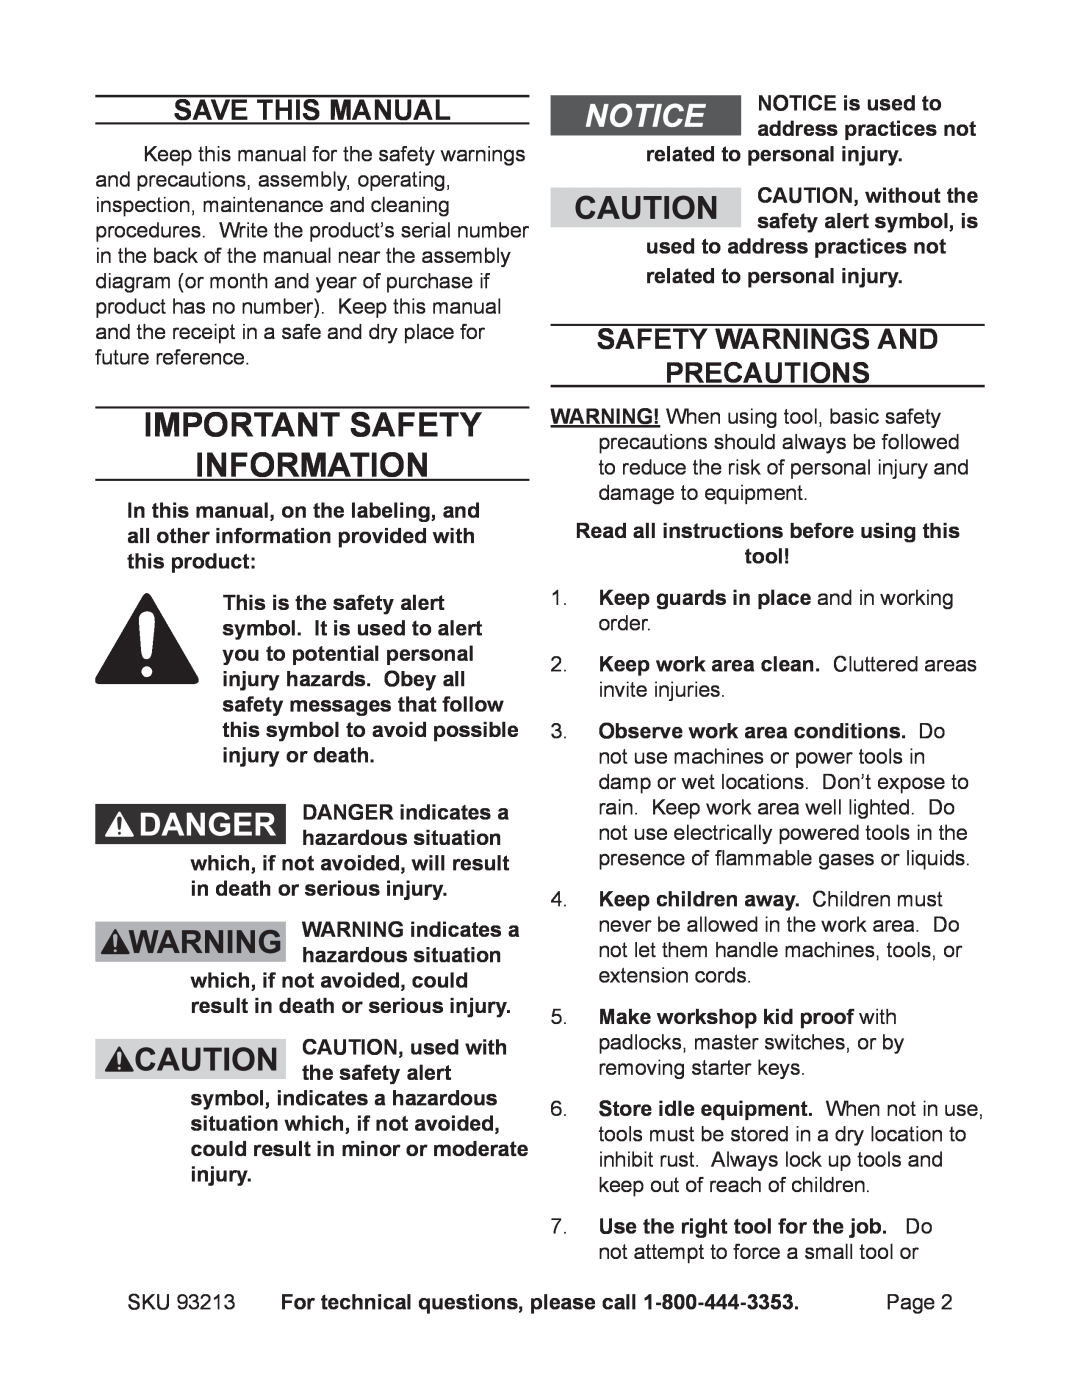 Chicago Electric 93213 manual Important SAFETY Information, Save This Manual, Safety Warnings and Precautions 